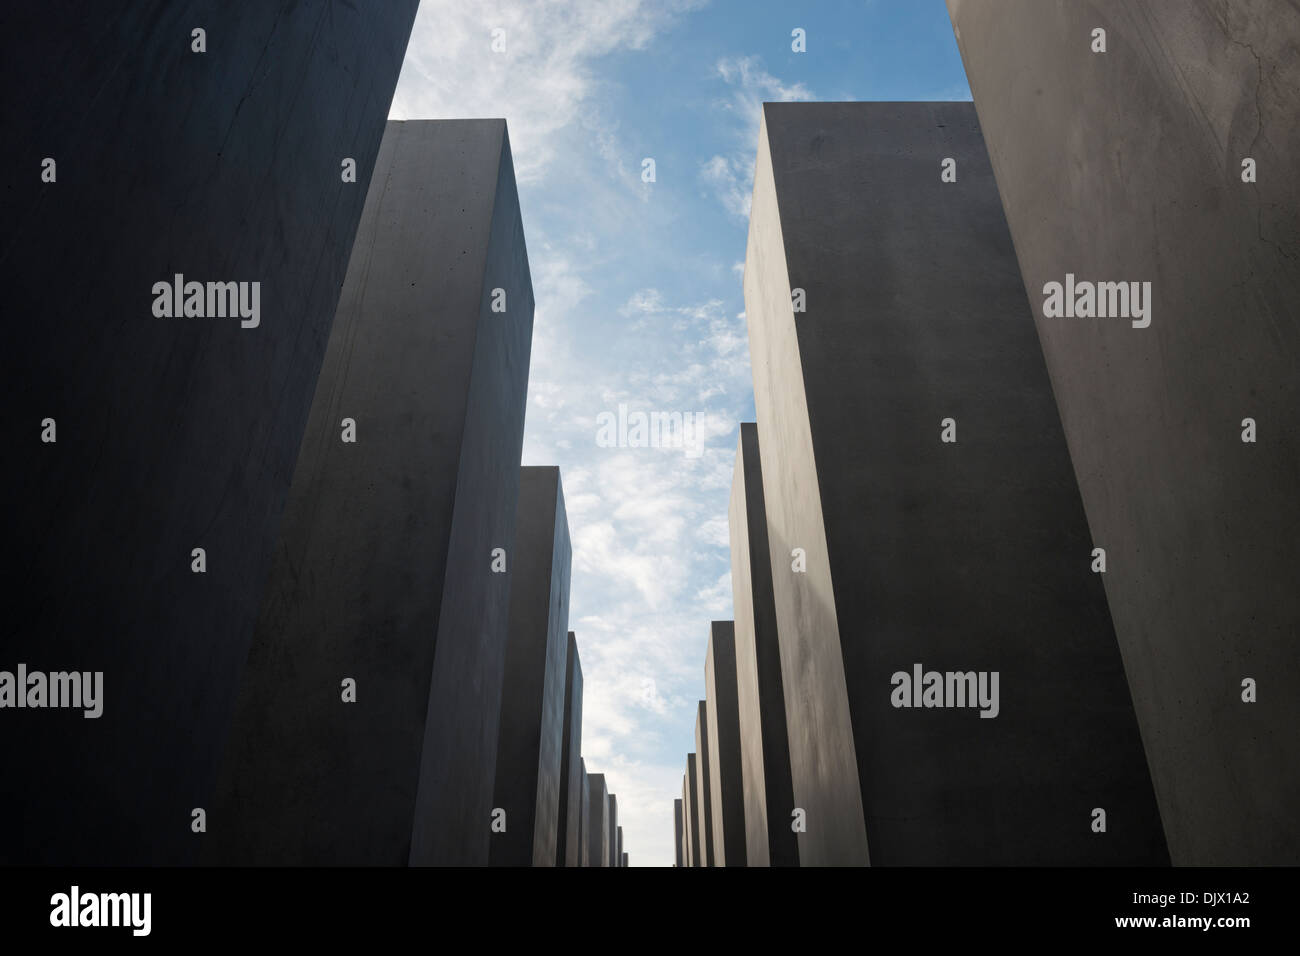 Abstract view of towering concrete slabs at the Holocaust Memorial in Berlin, Germany, Europe. Stock Photo